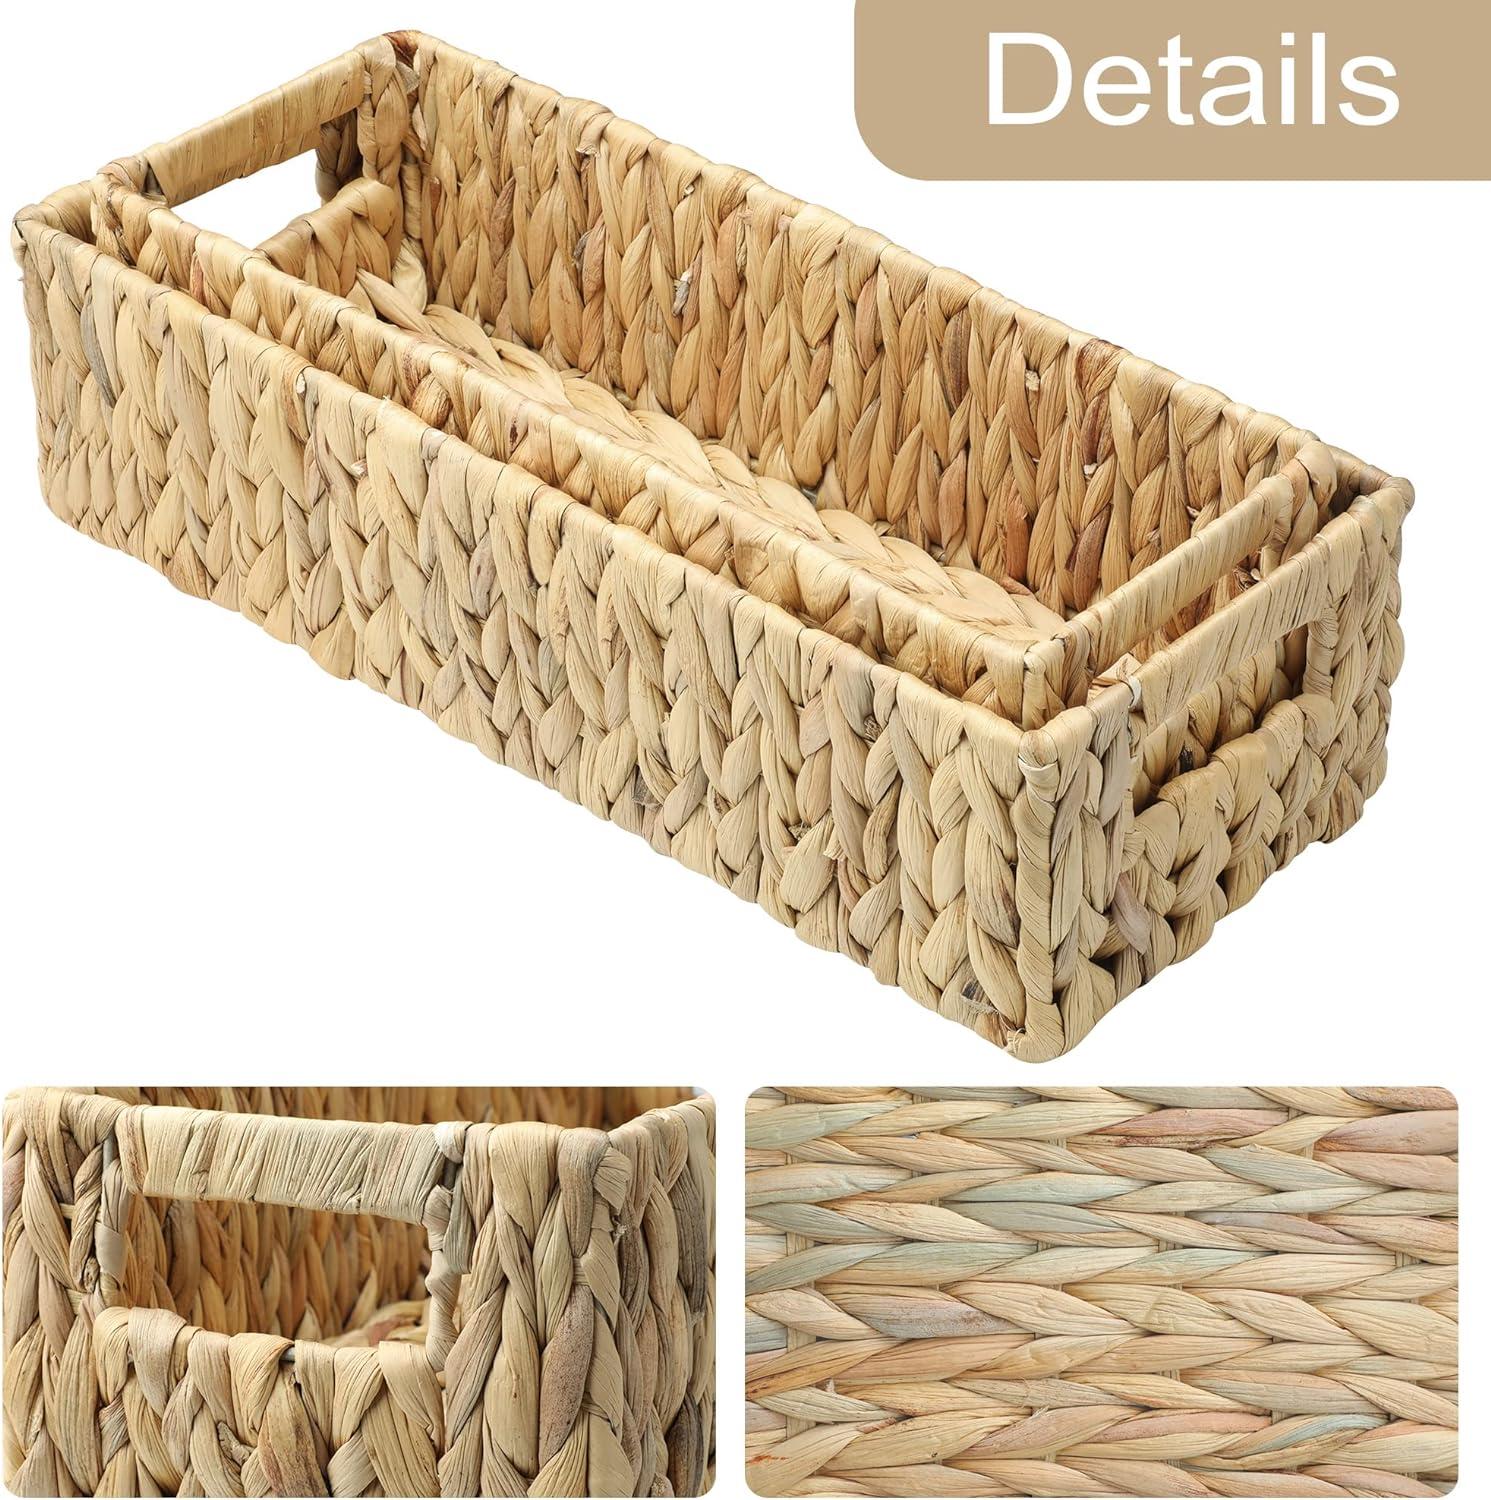 Seagrass Handcrafted Toilet Paper Holder